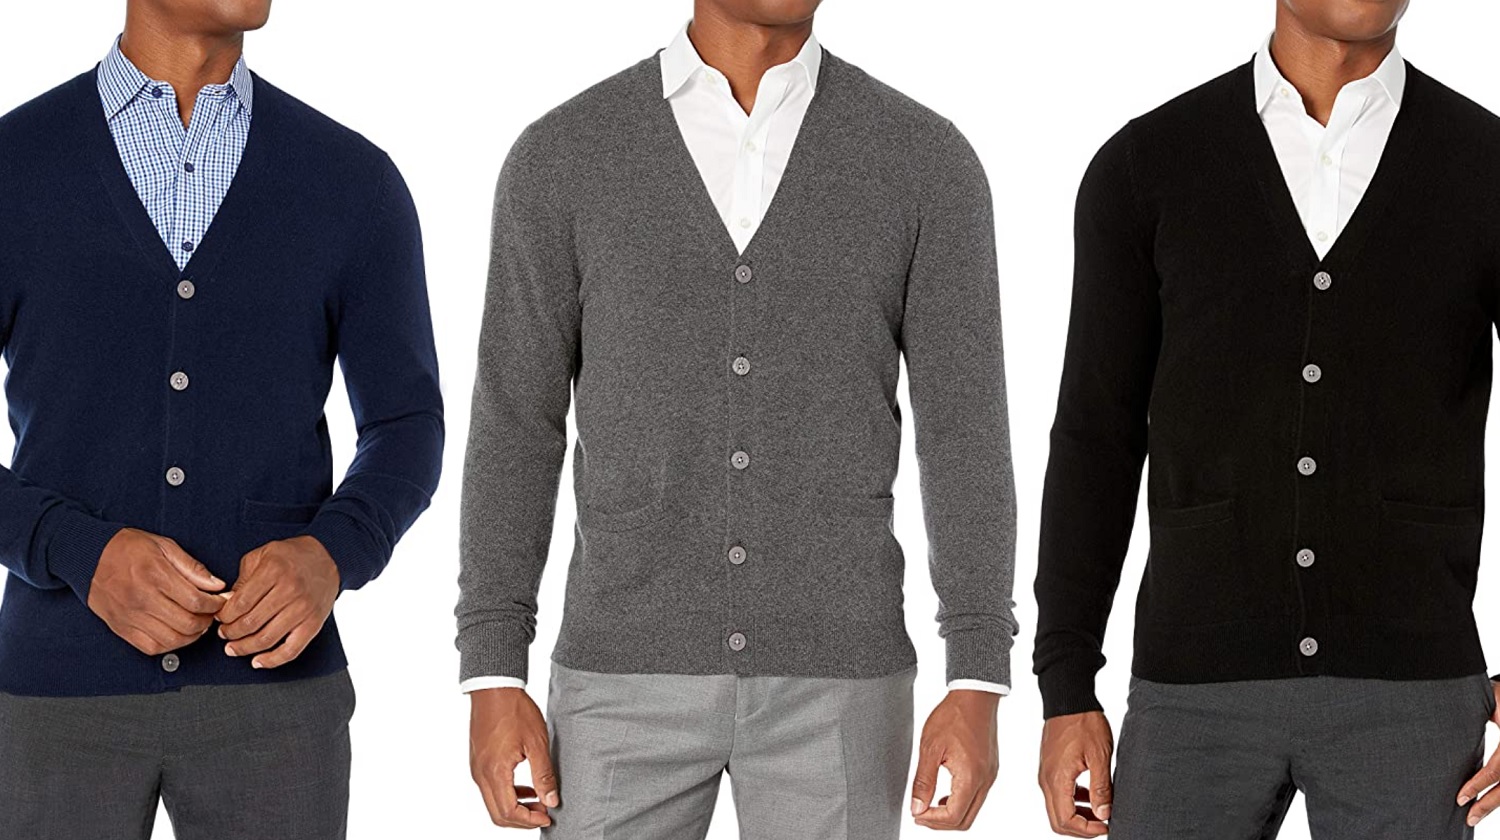 How To Do Athleisure for Men – 9 Affordable Outfit Examples